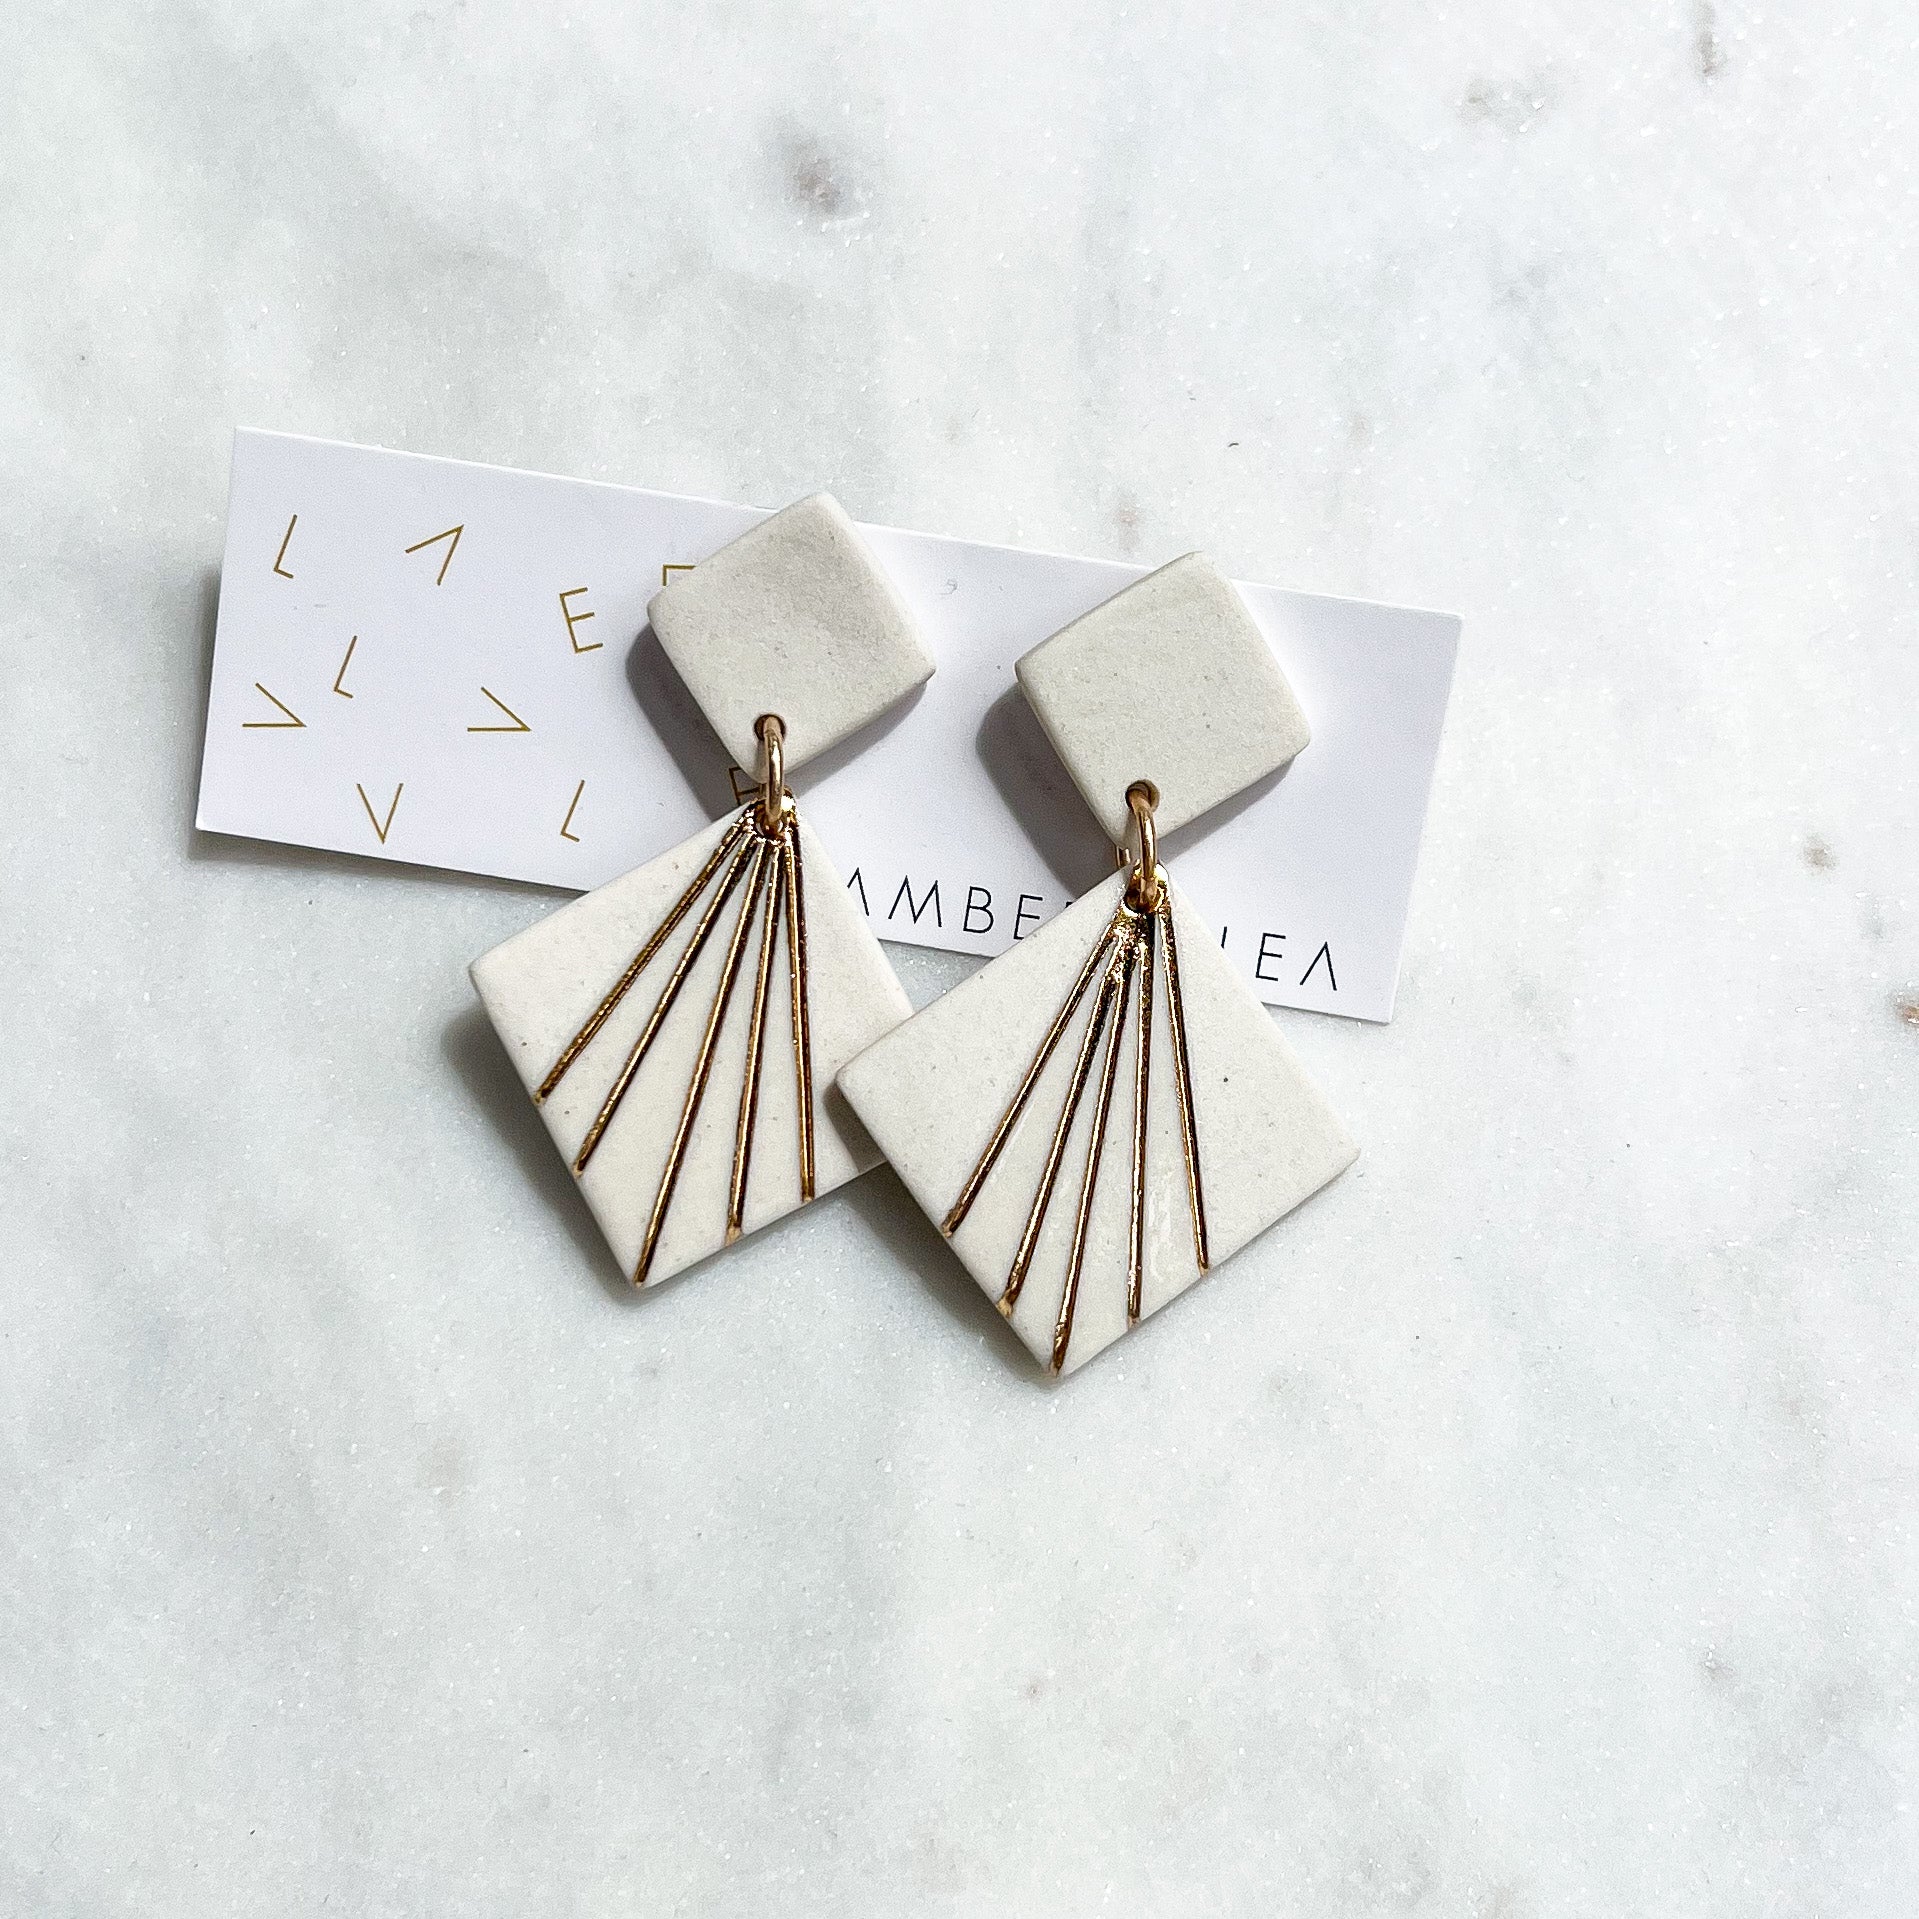 Astro White Stud Earrings with Gold Inlay by AMBER E LEA